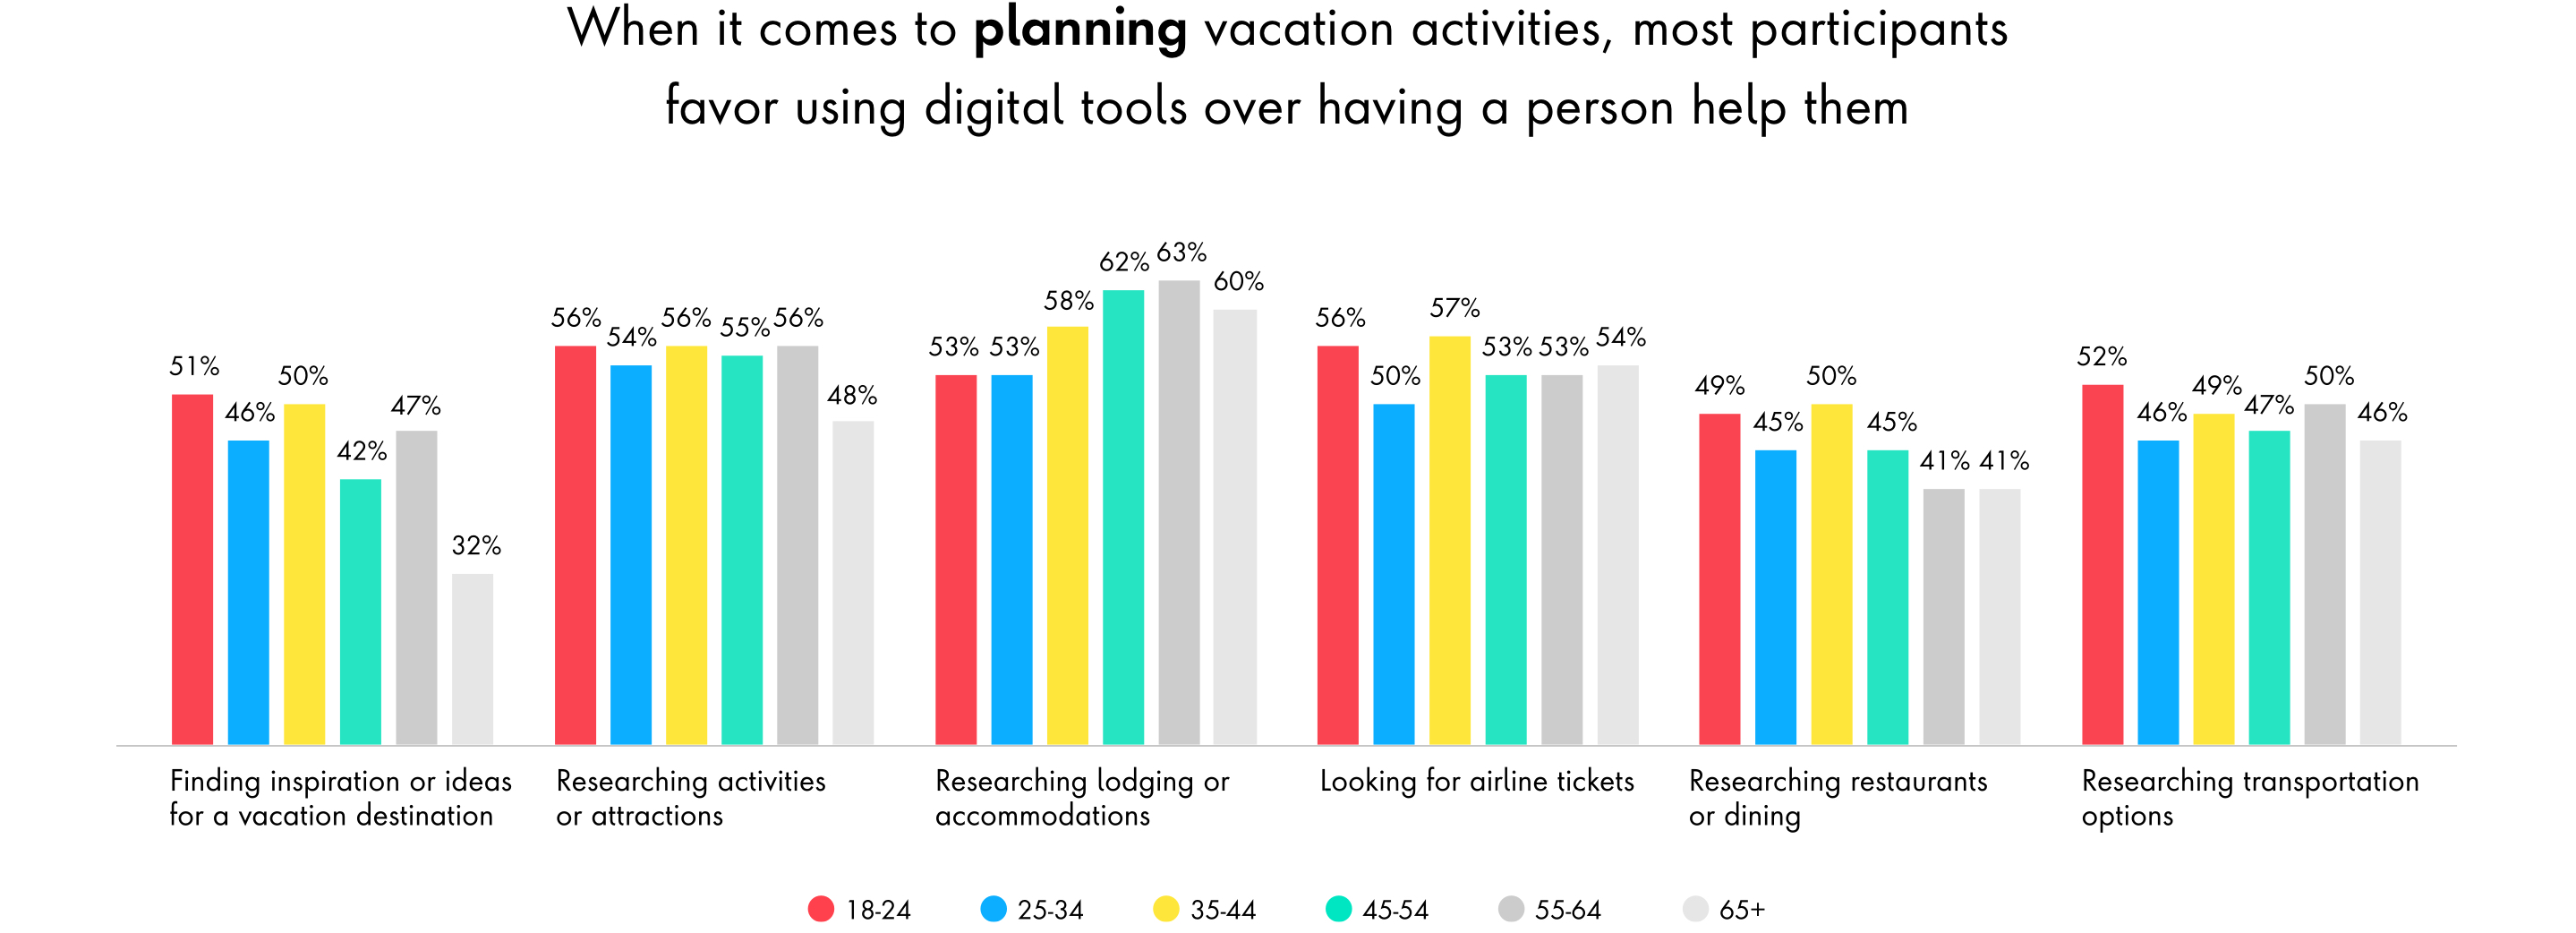 Chart: When it comes to planning vacation activities, most participants favor using digital tools over having a person help them